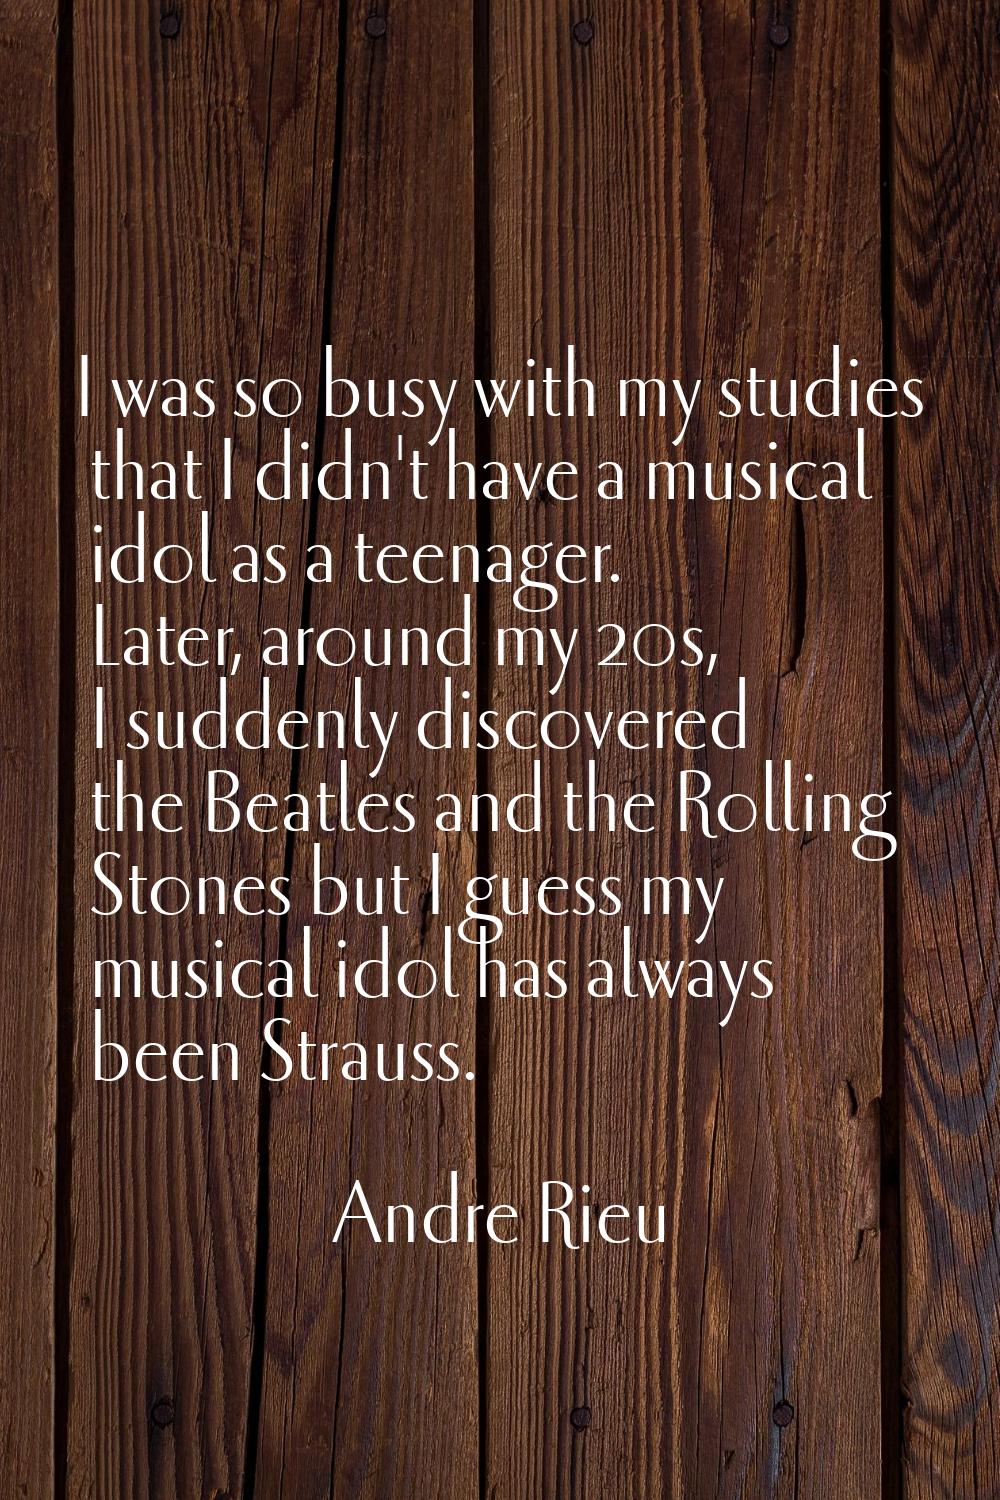 I was so busy with my studies that I didn't have a musical idol as a teenager. Later, around my 20s